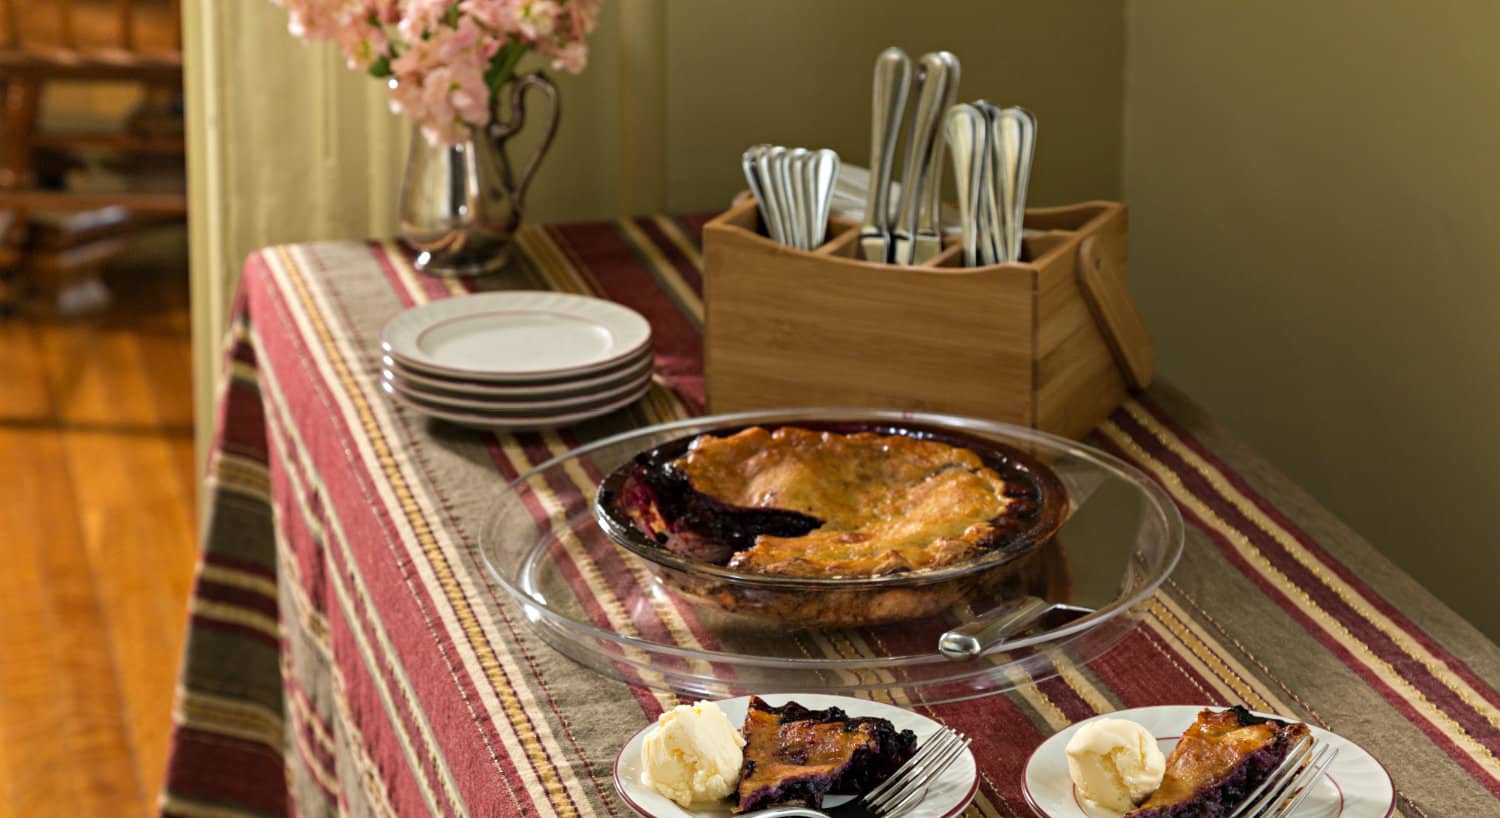 A table with a striped cloth holds a pie along with white plates and cutlery